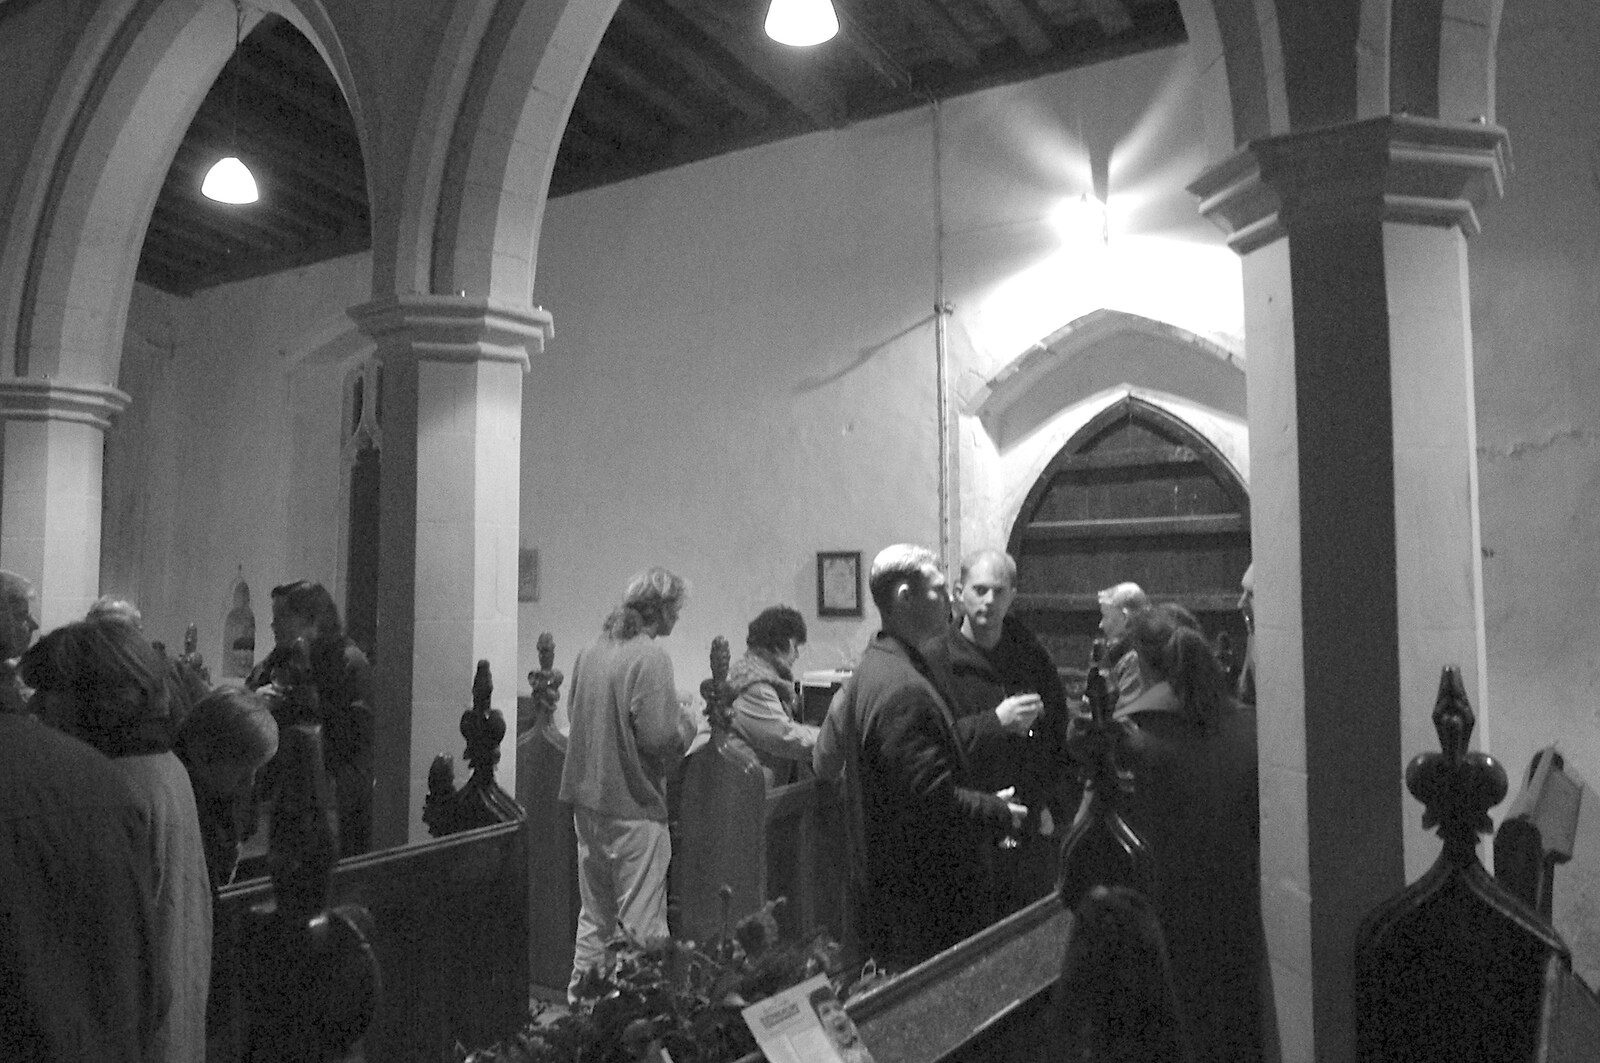 Paul in the church at Thrandeston from The BBs at the Park Hotel, and Christmas in Blackrock, Dublin, Ireland - 25th December 2006